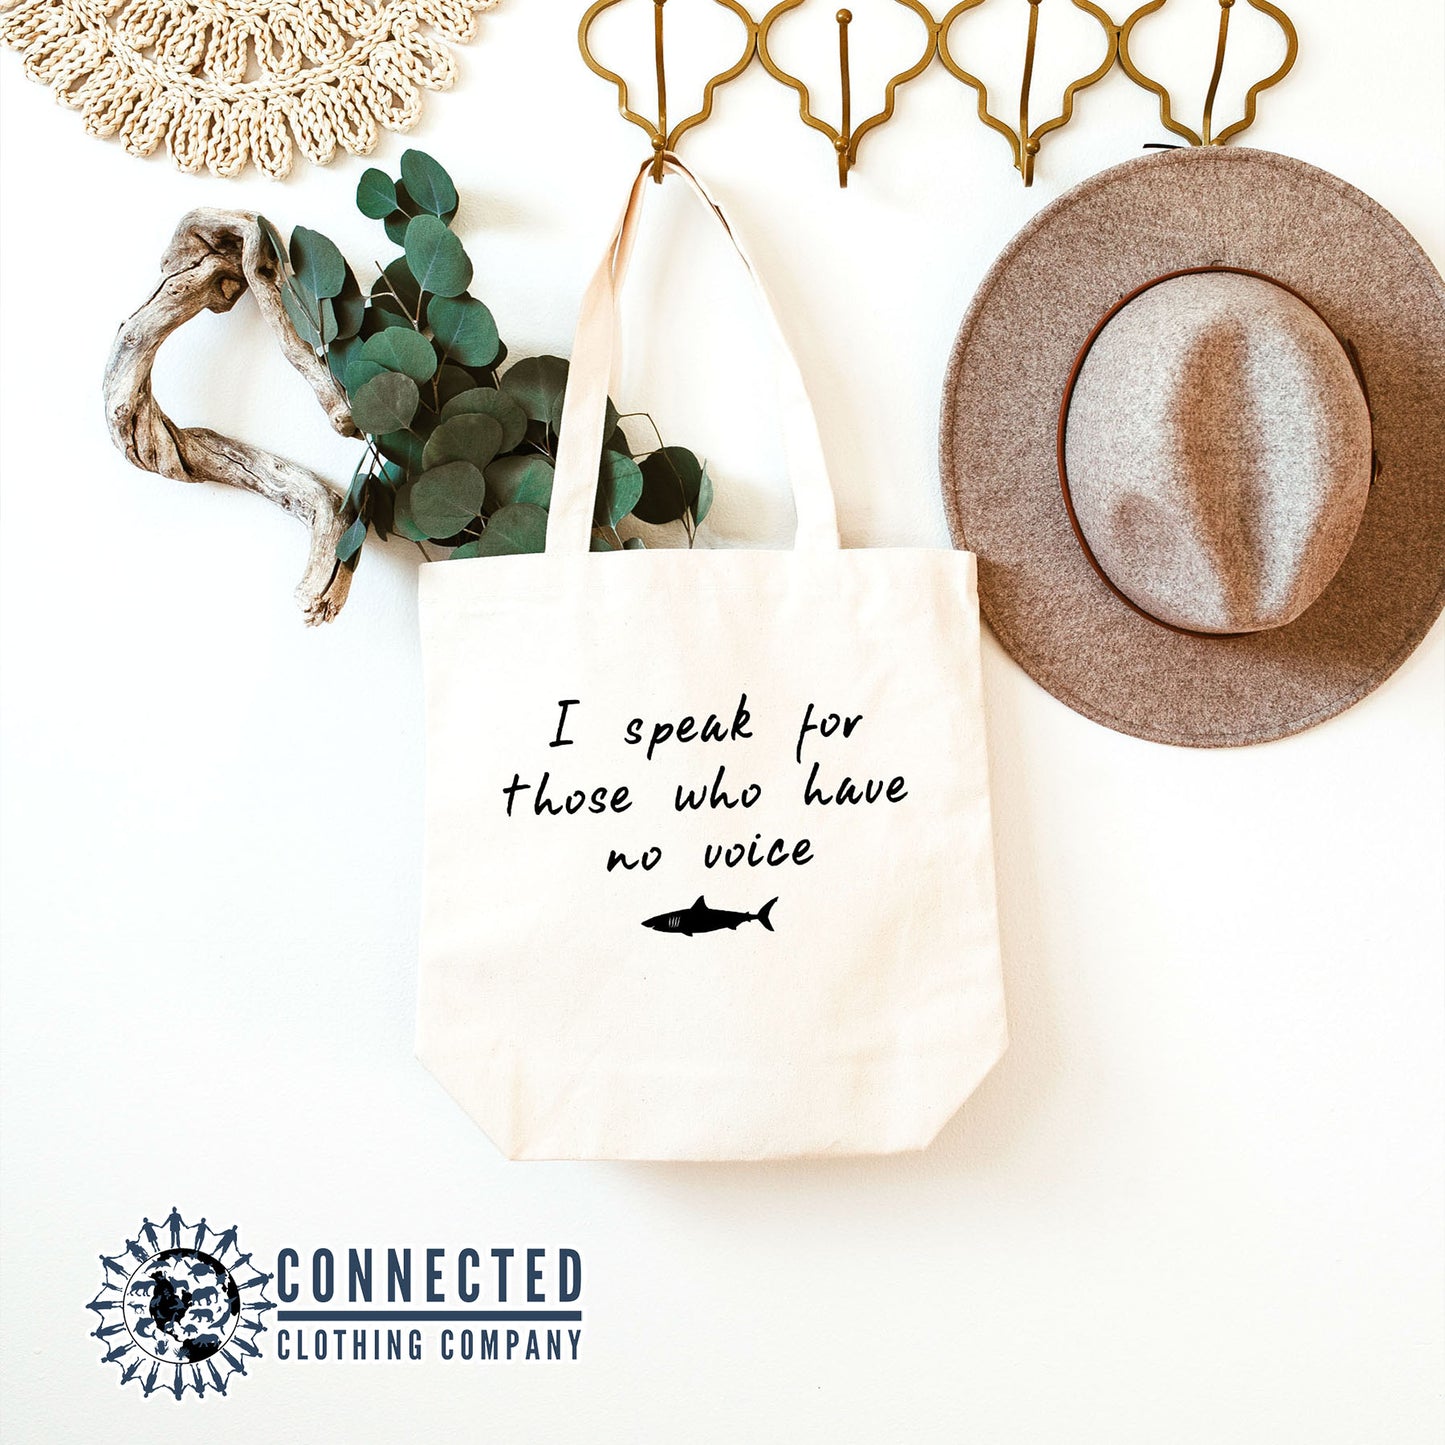 Be The Voice Shark Tote Bag - sweetsherriloudesigns - 10% of proceeds donated to ocean conservation